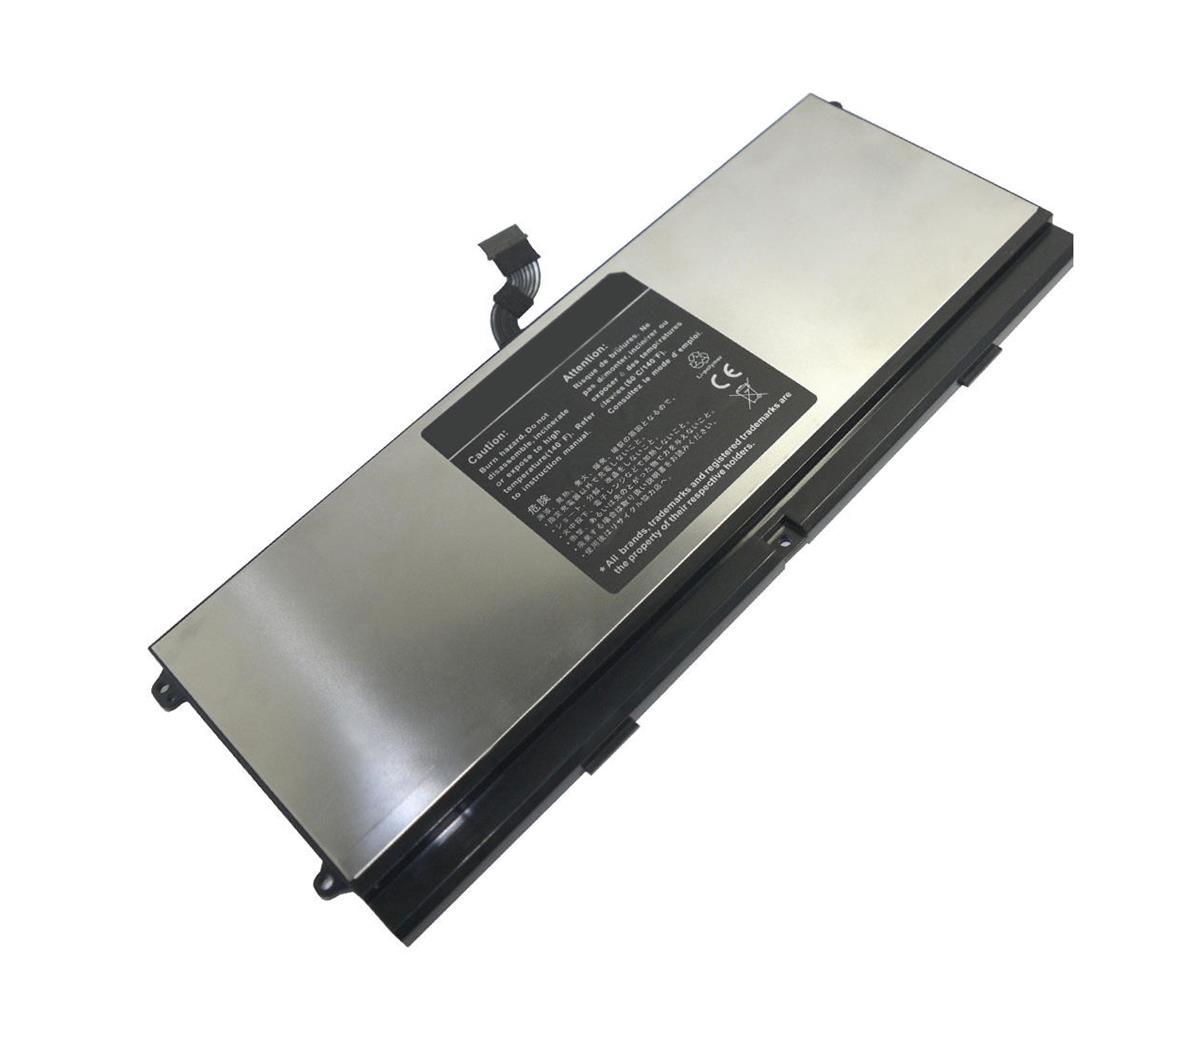 75WY2 Dell 8-Cell 64WHr Li-Ion Battery for XPS 15z Laptop (Refurbished)